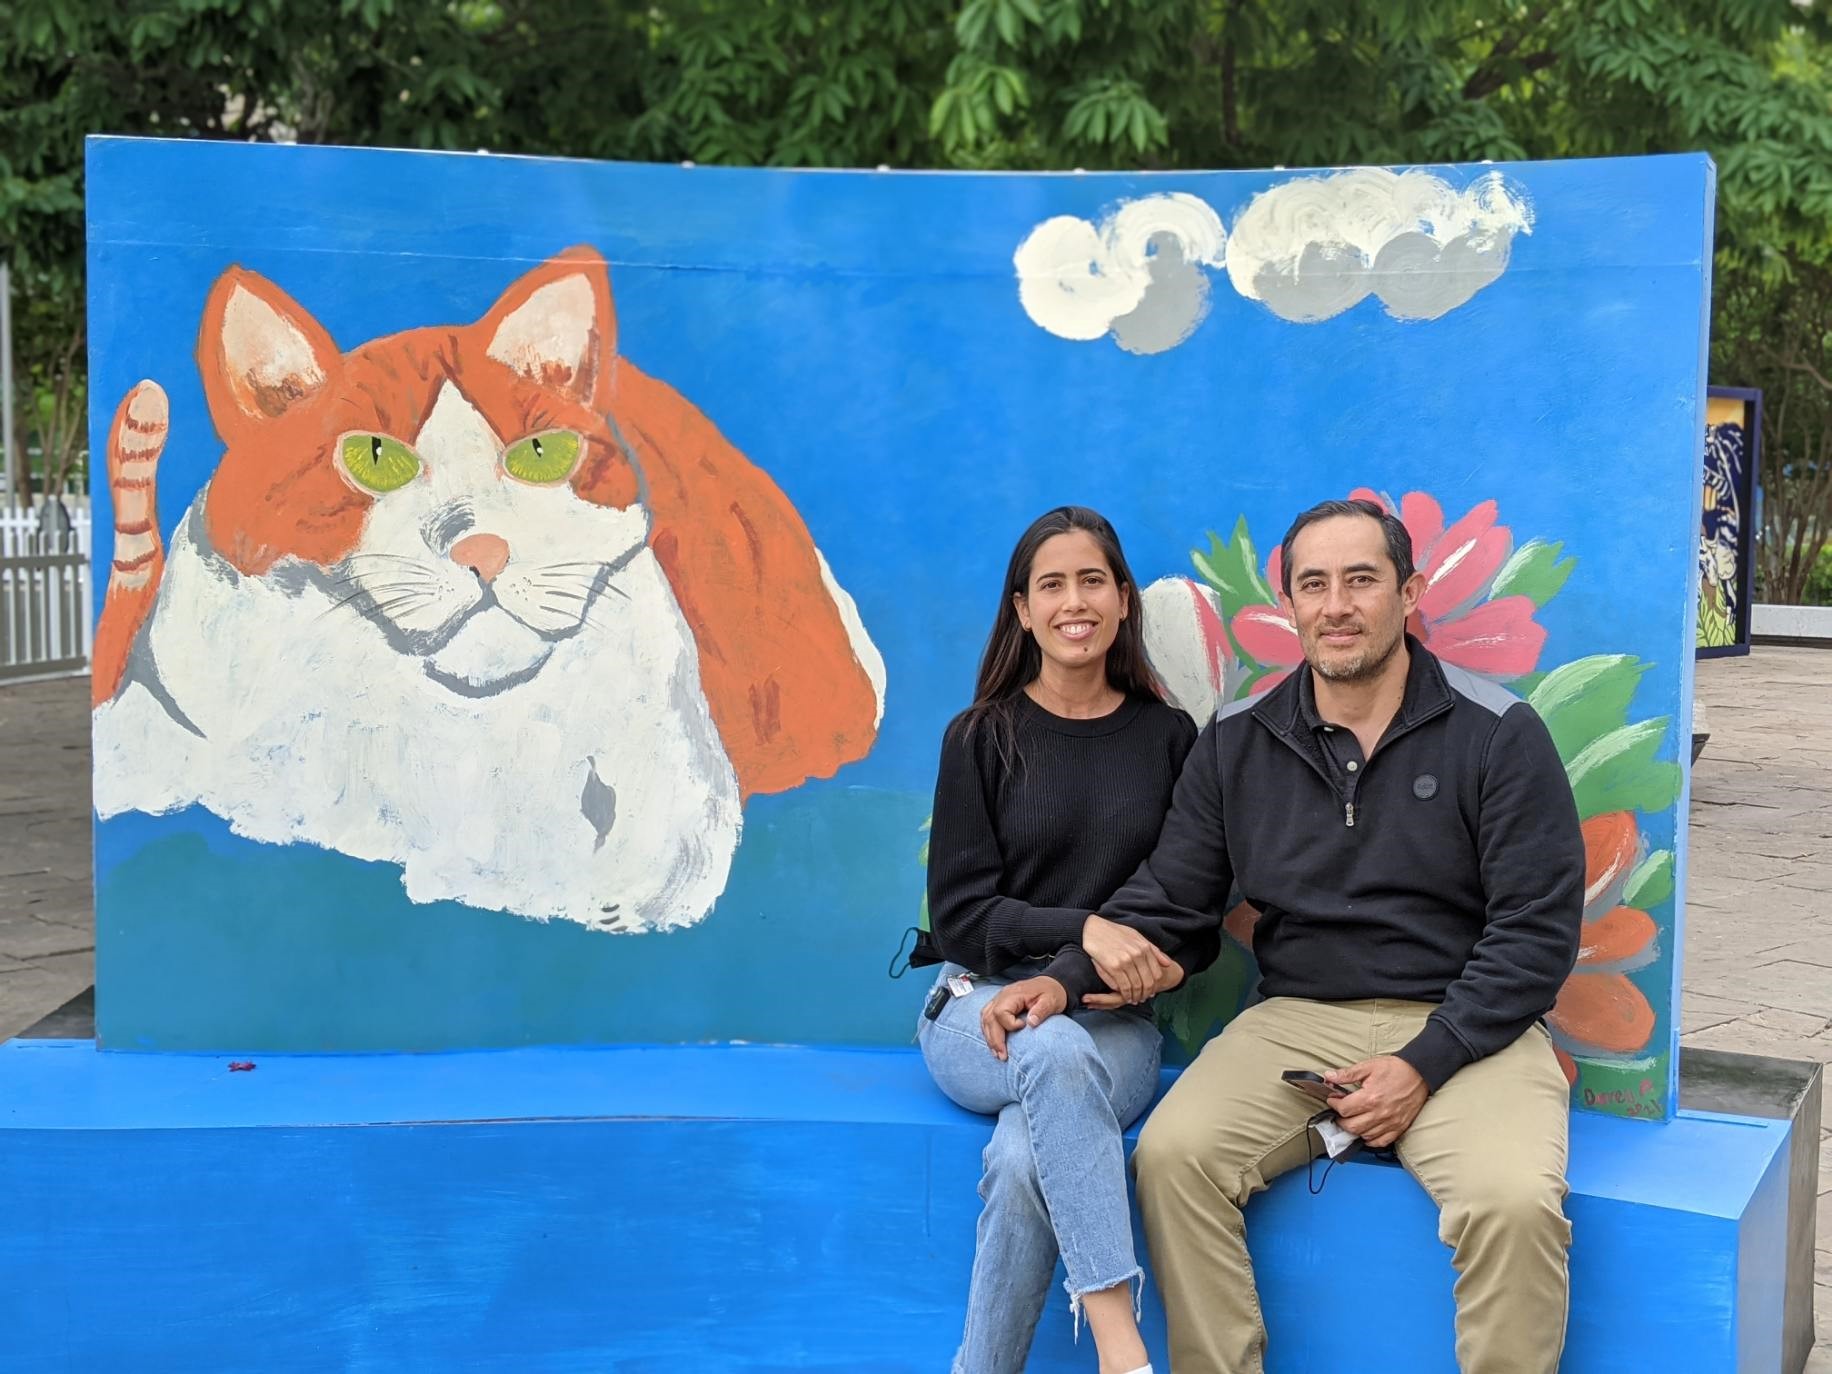 a man and woman sit in front of a mural featuring a white and orange cat on a blue background